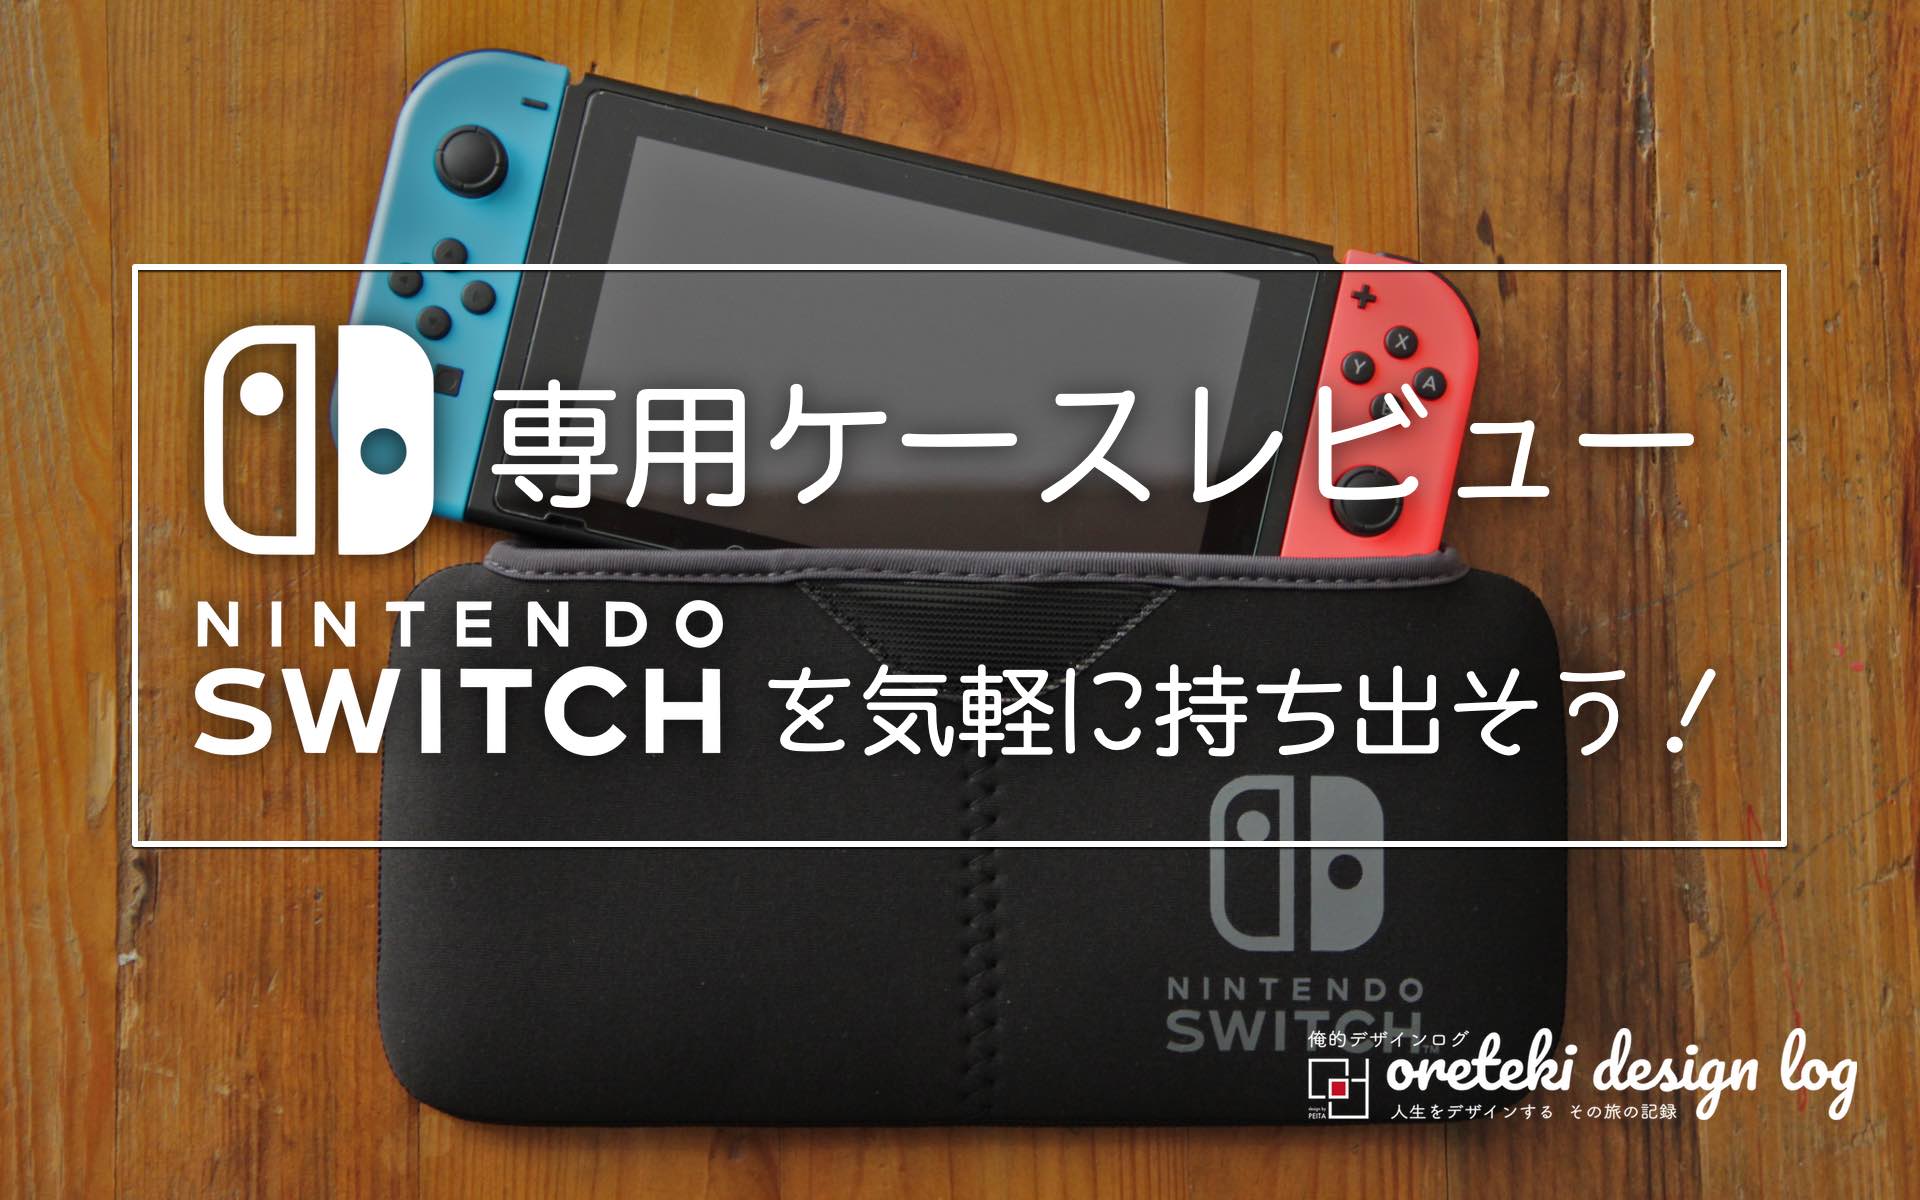 Nintendo switch専用ケースポーチ｜QUICK POUCH